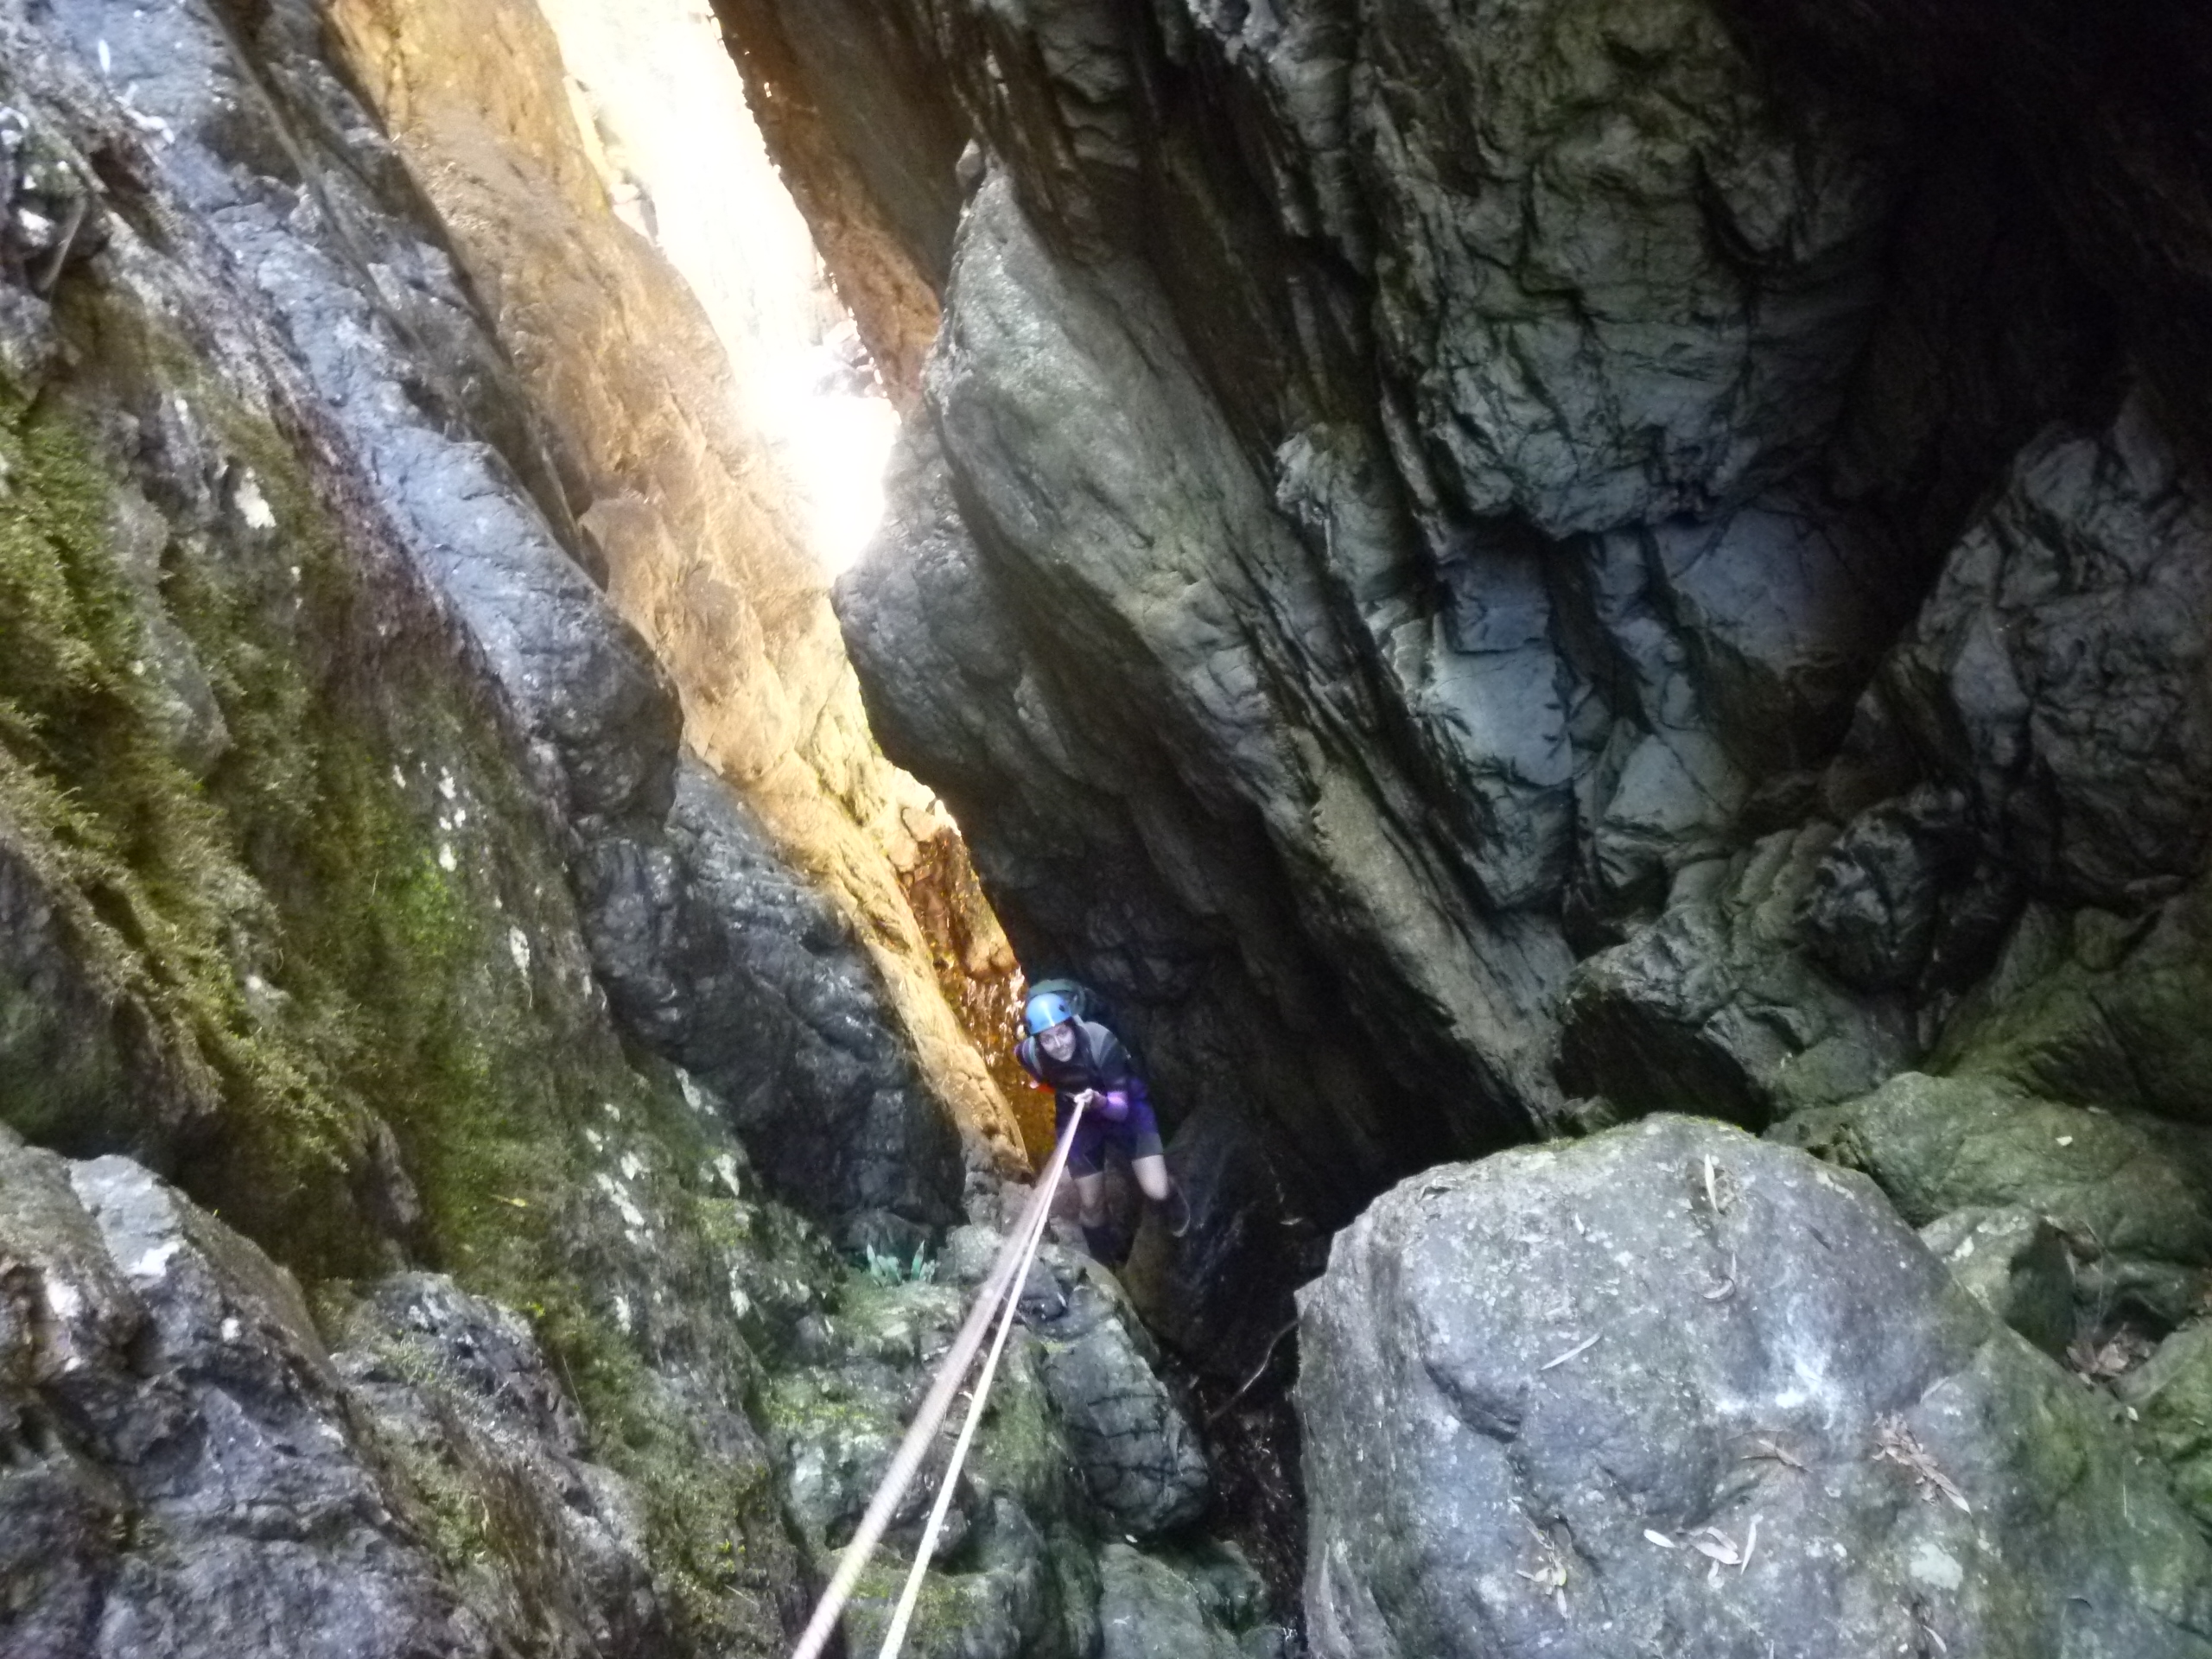 Kimberly on abseil 3, heading for the chockstone